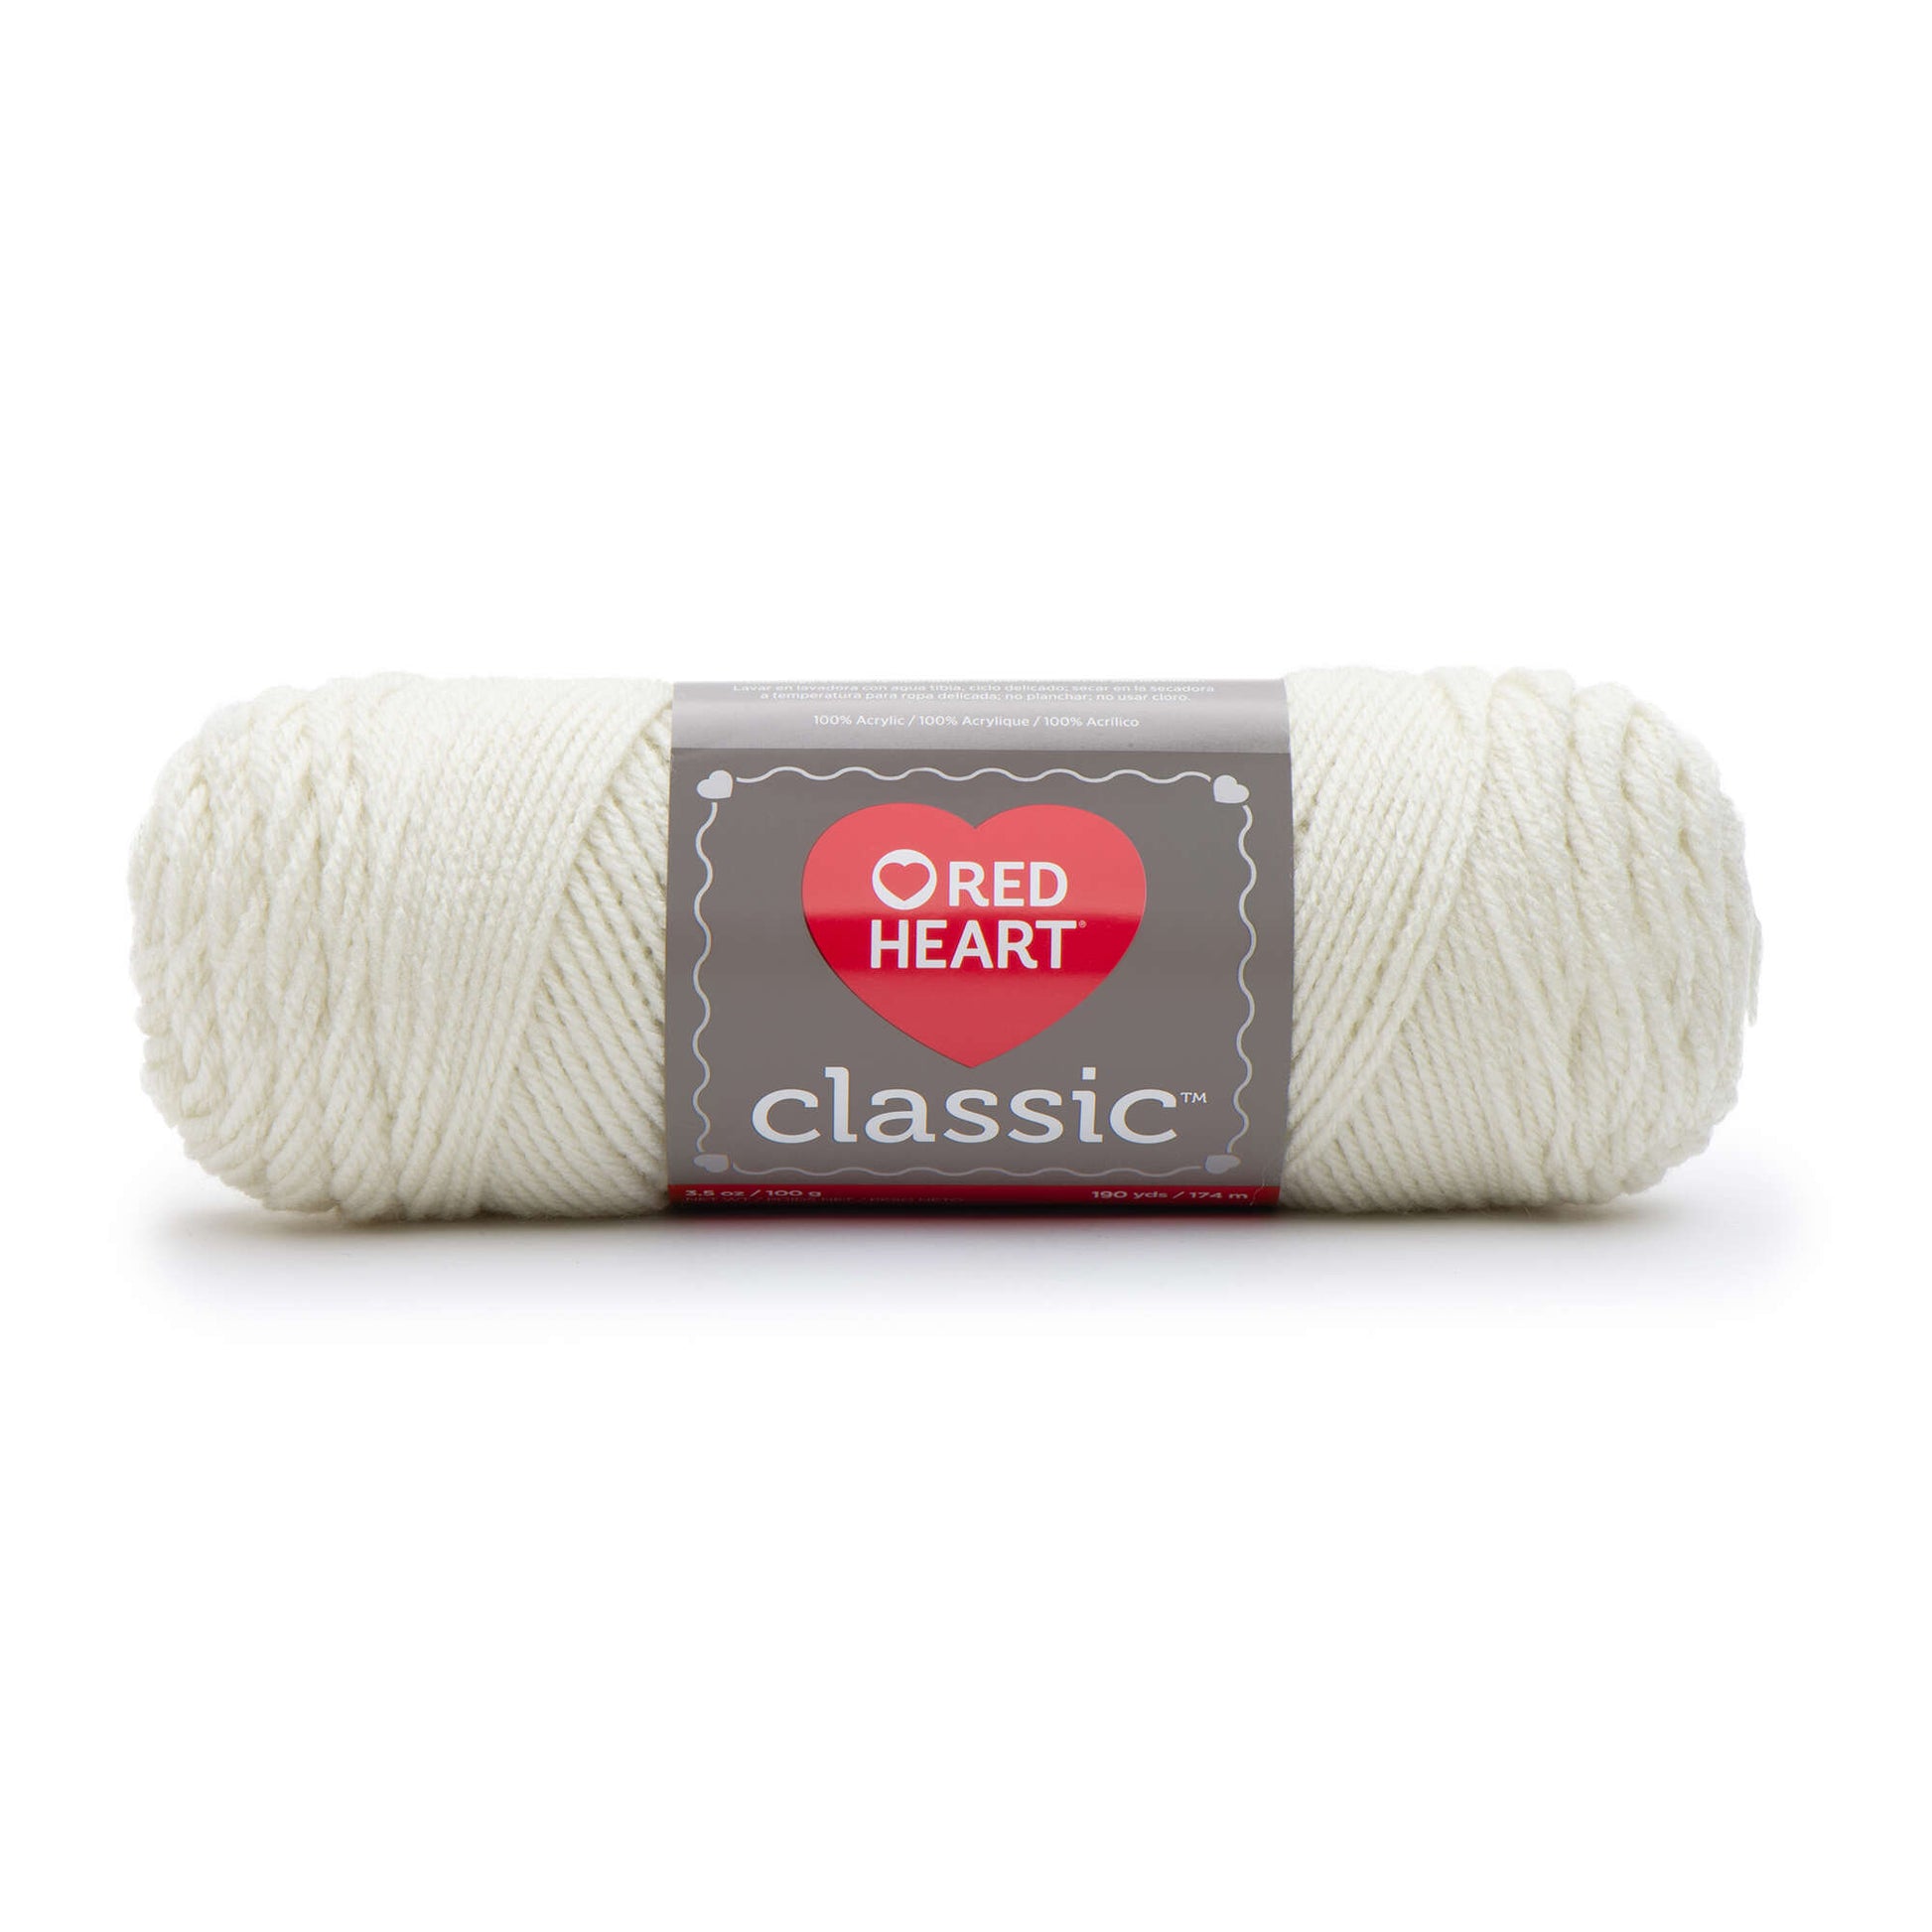 Red Heart Classic Yarn - Clearance shades Egg Shell